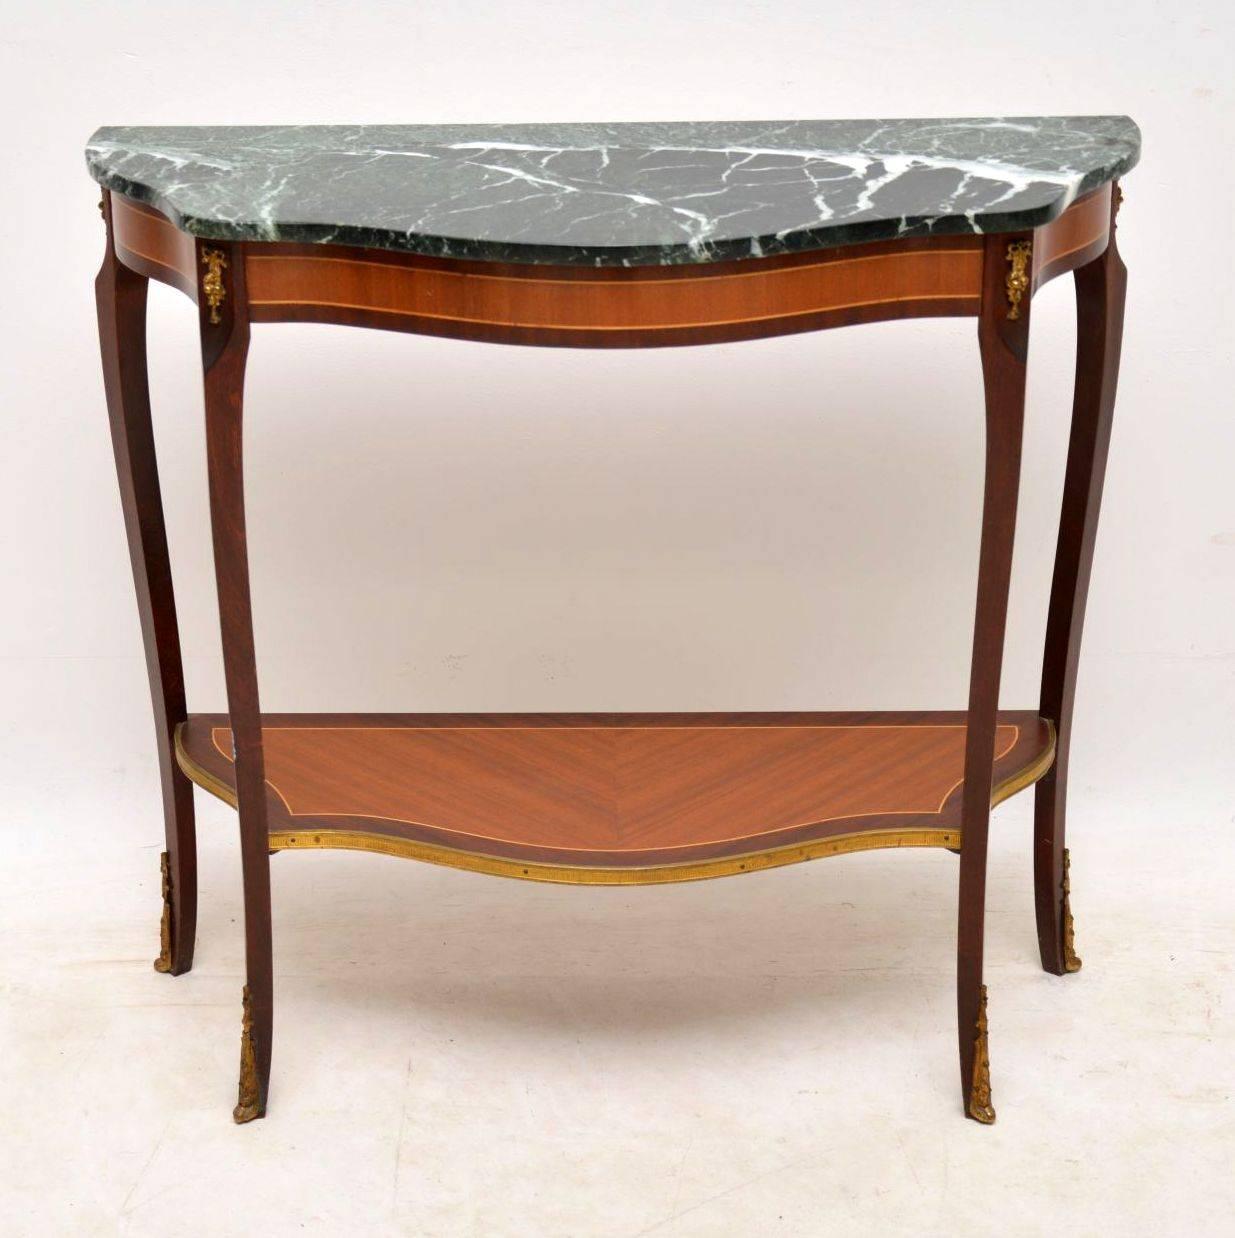 Antique French style marble-top console table in great condition, dating from around the 1930s-1950s period. The wood is kingwood and mahogany and it has gilt metal mounts. This table has a serpentine shaped front and the bottom tier also has a gilt